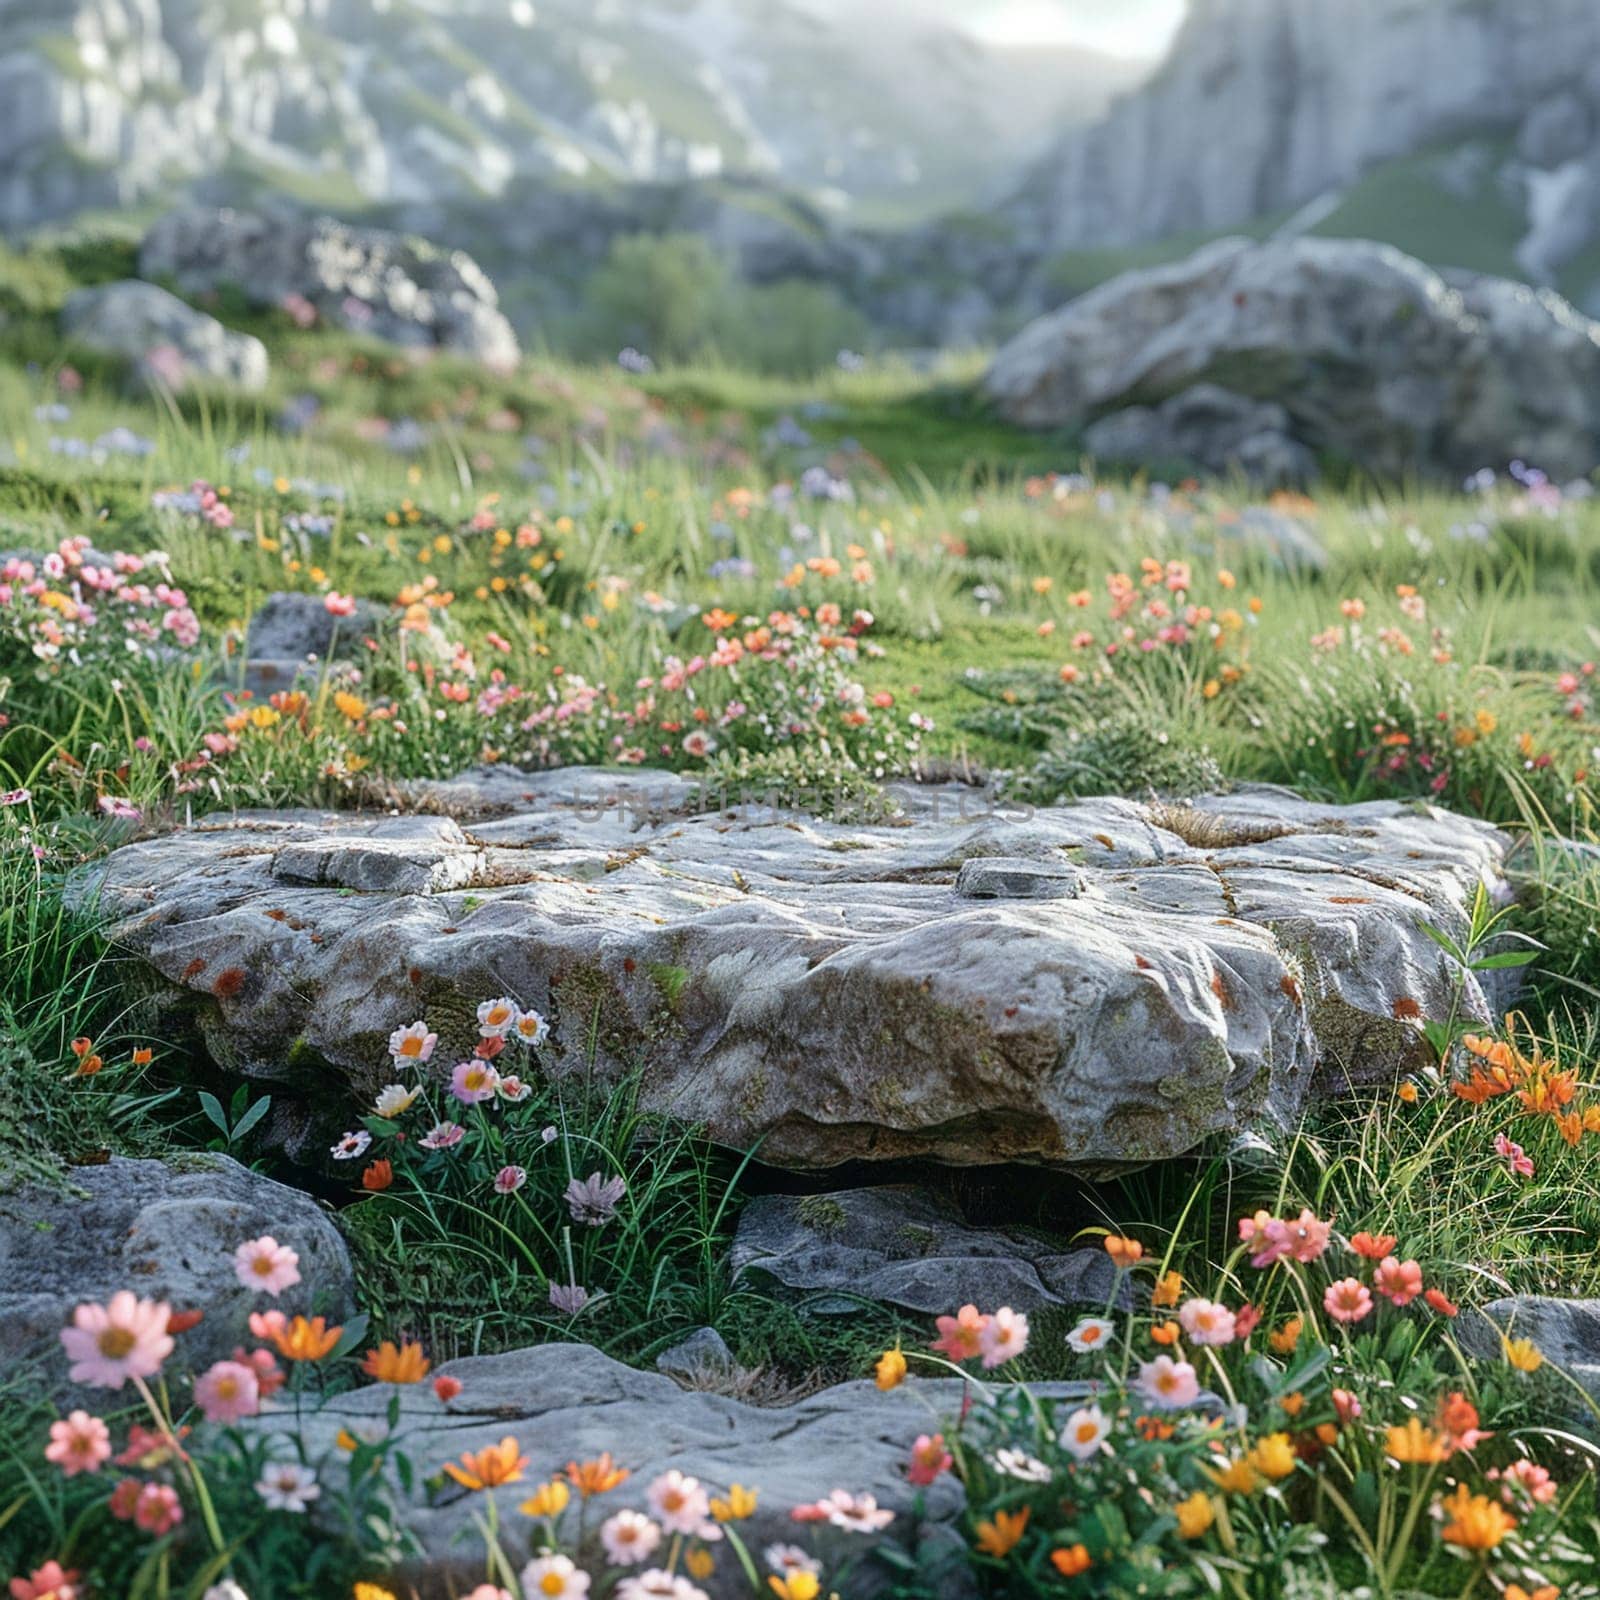 Rustic Stone Plinth Surrounded by Wildflowers and Greenery The natural textures blur into an outdoor by Benzoix